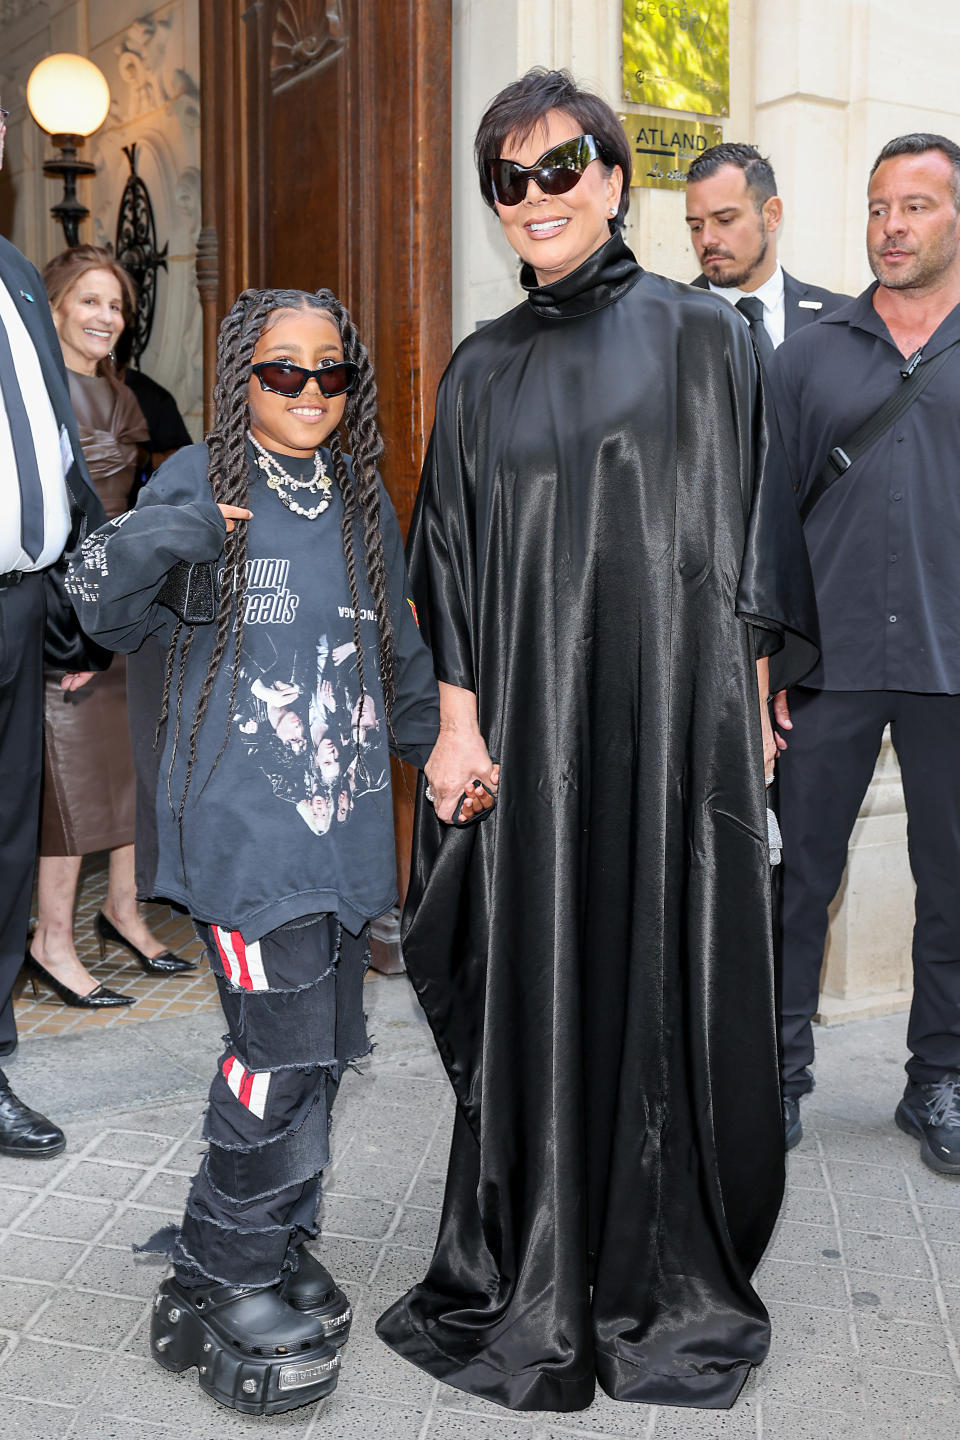 North West and Kris Jenner showing their support at the Balenciaga show. (Photo by Jacopo M. Raule/Getty Images For Balenciaga)